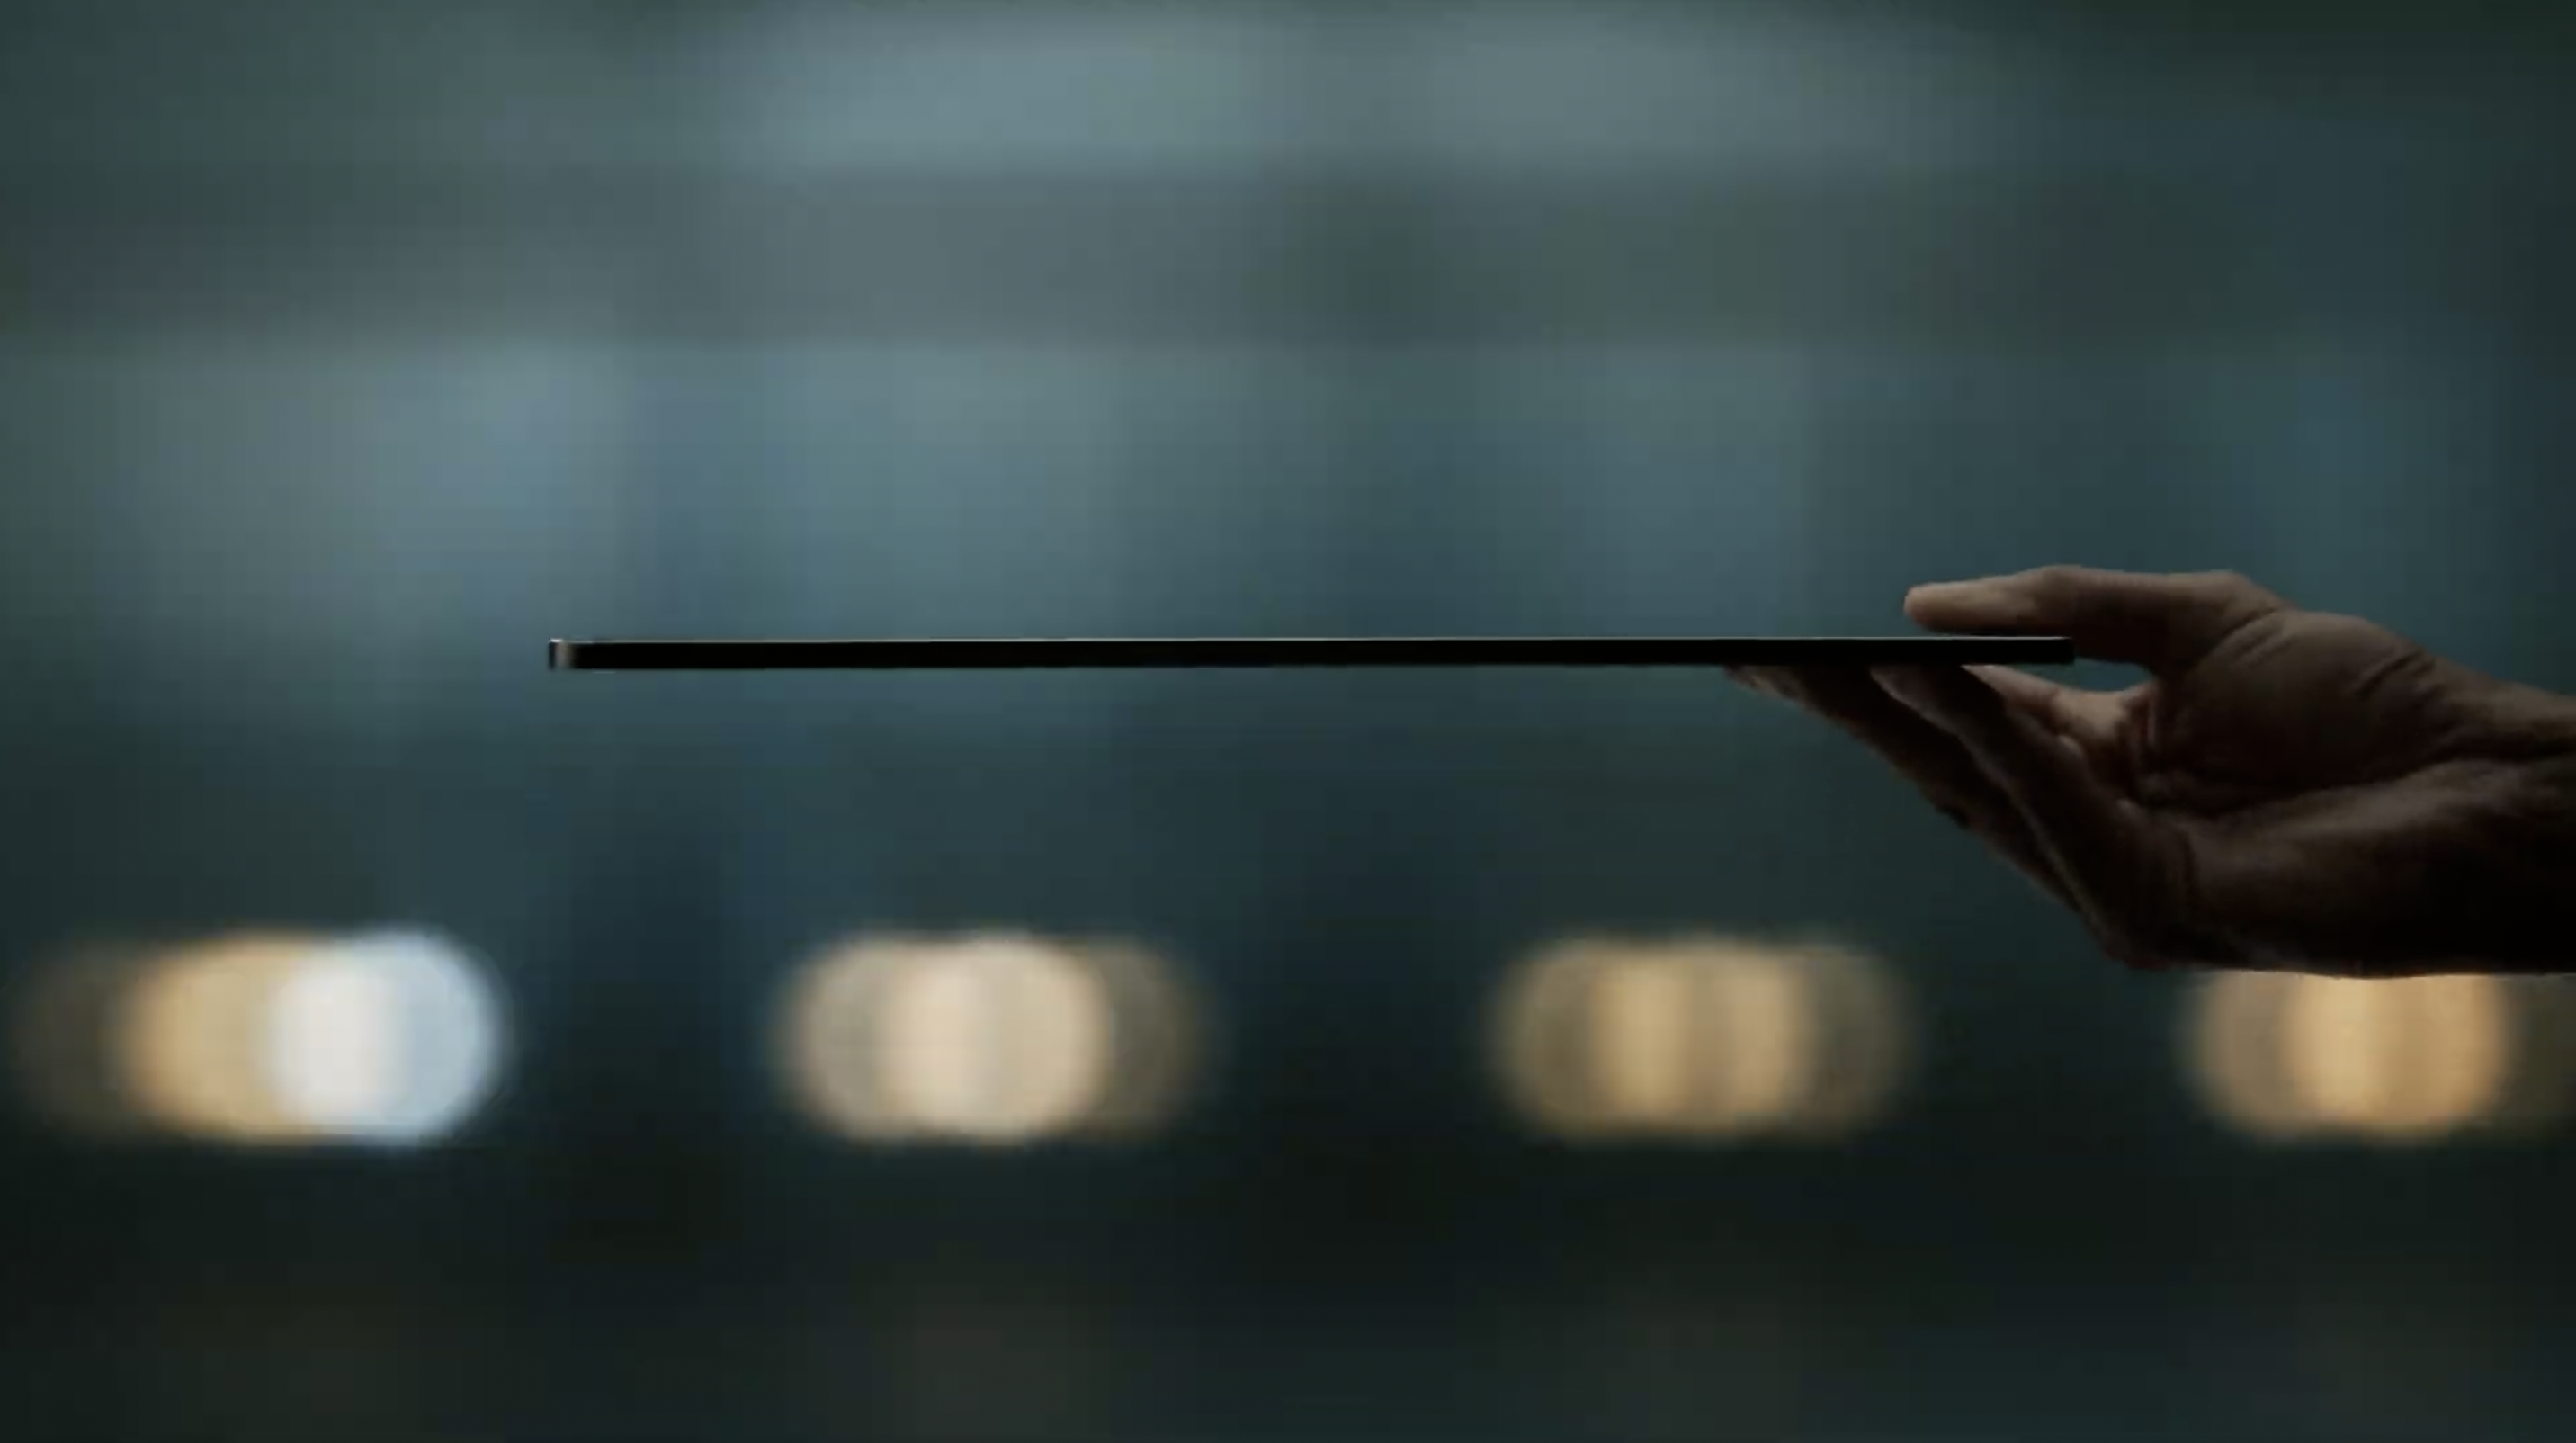 How the new iPad Pro became Apple’s thinnest product in history | Hard Philosophy